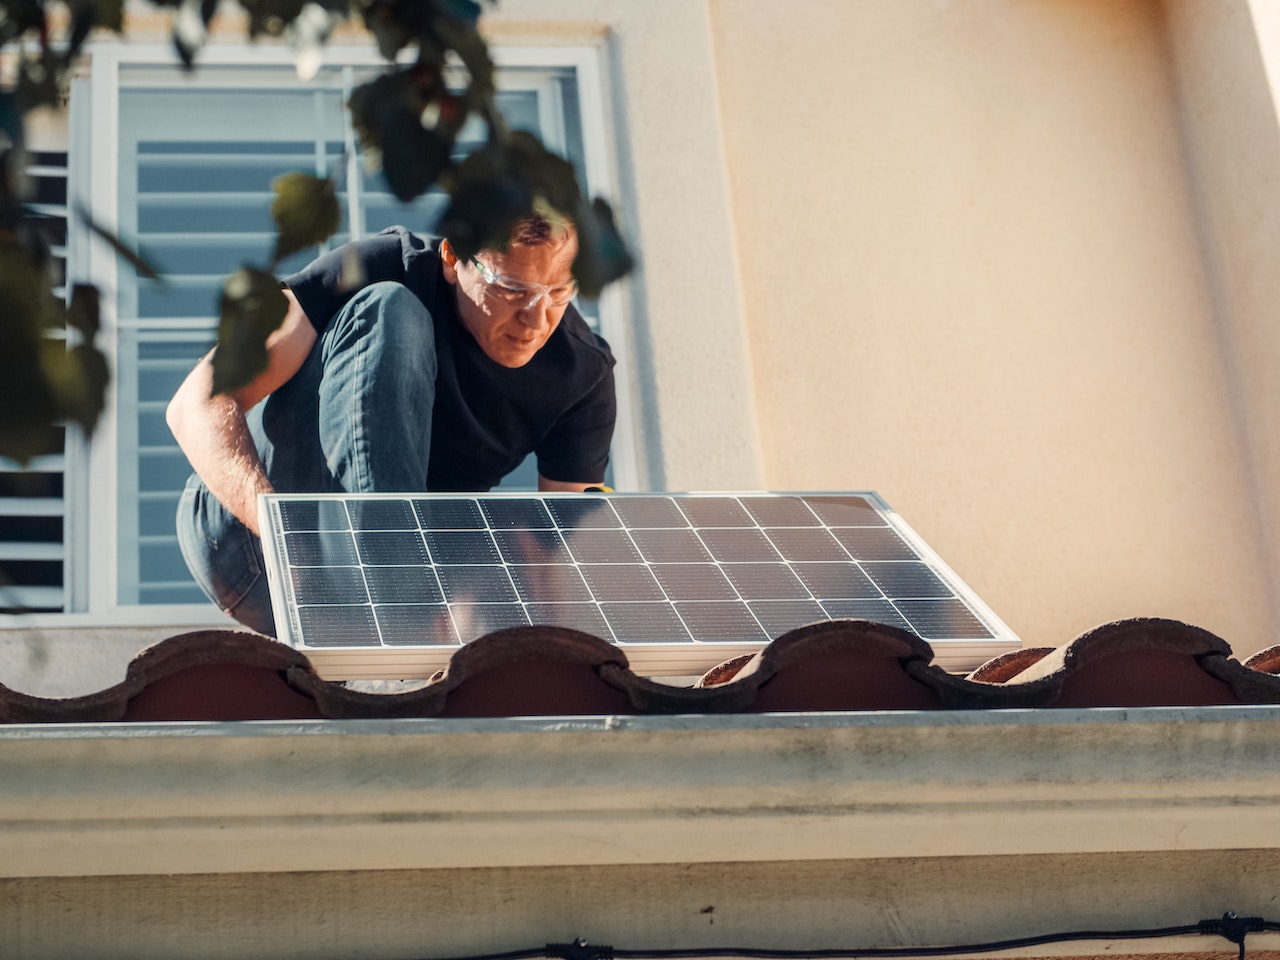 Solar panel technician installing a solar panel on a tile roof in Arizona.